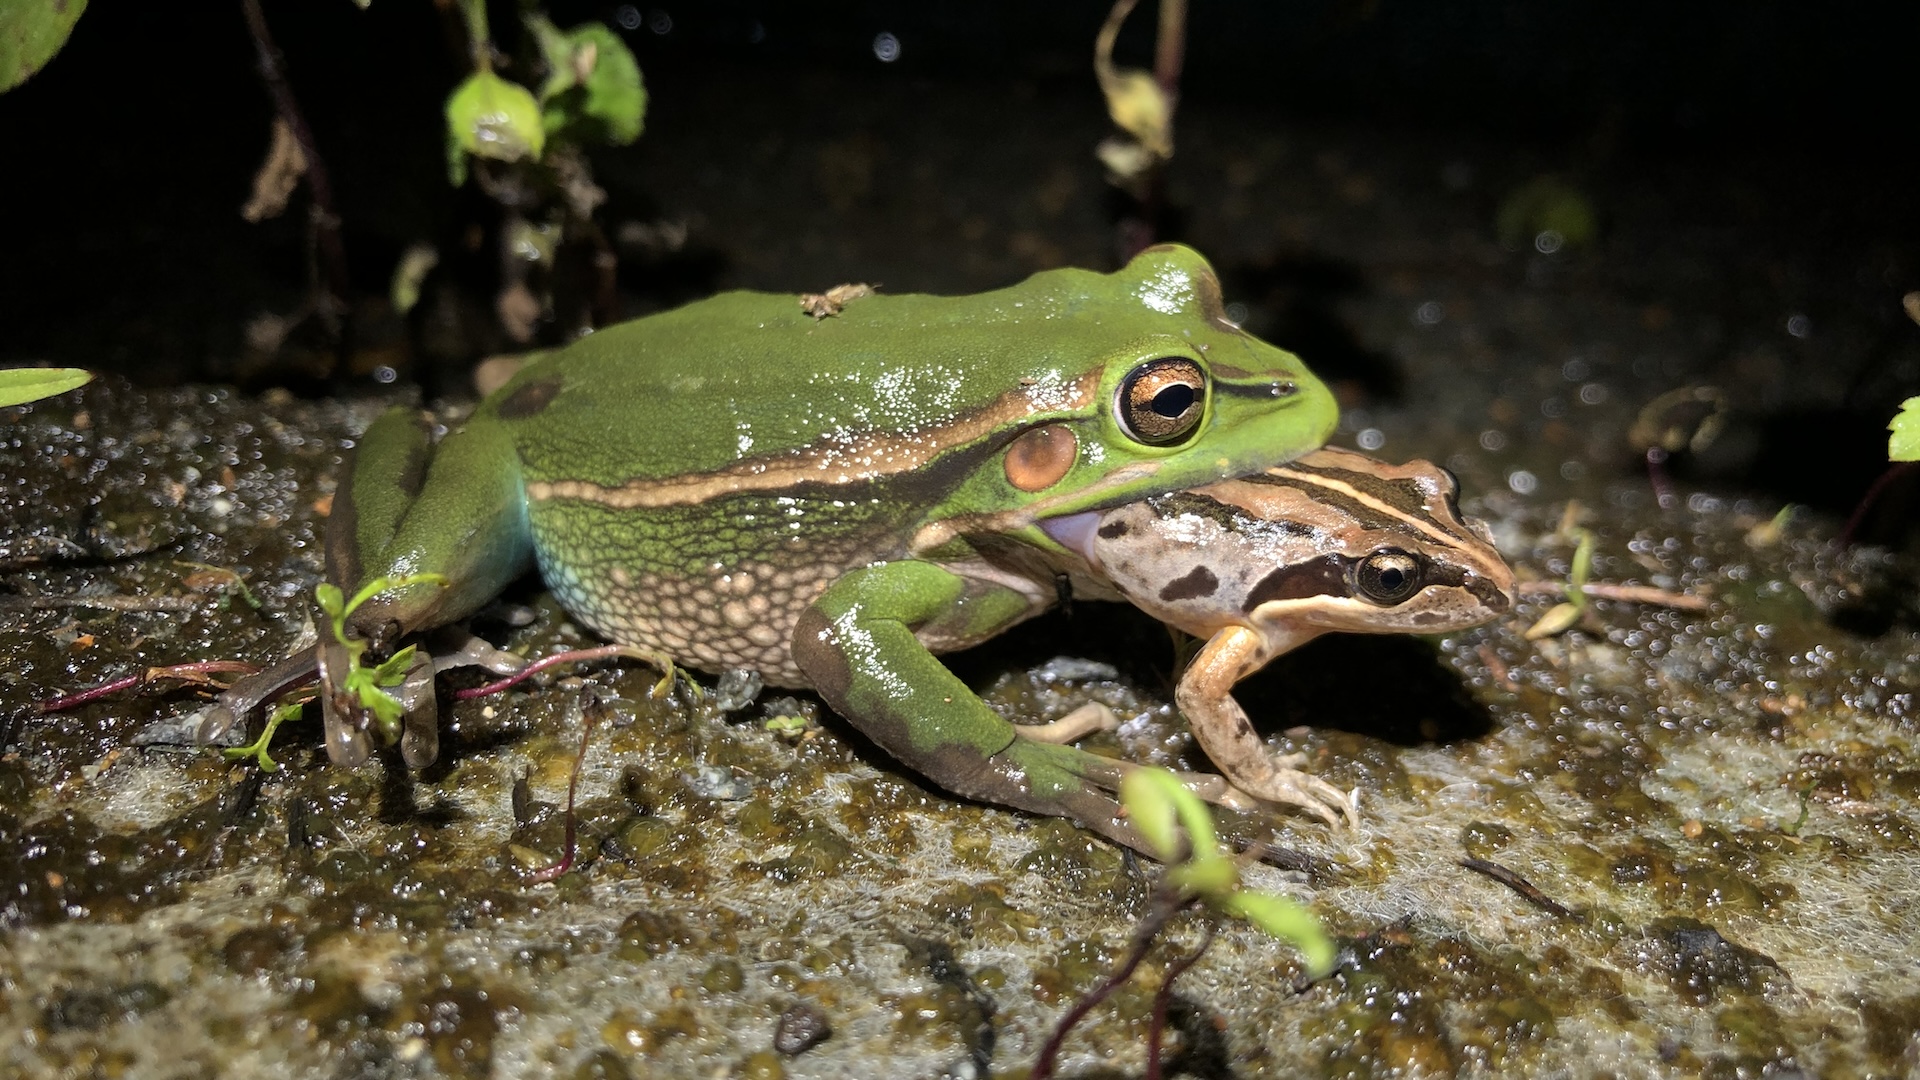  'It's risky for male frogs out there': Female frog drags and attempts to eat screaming male 